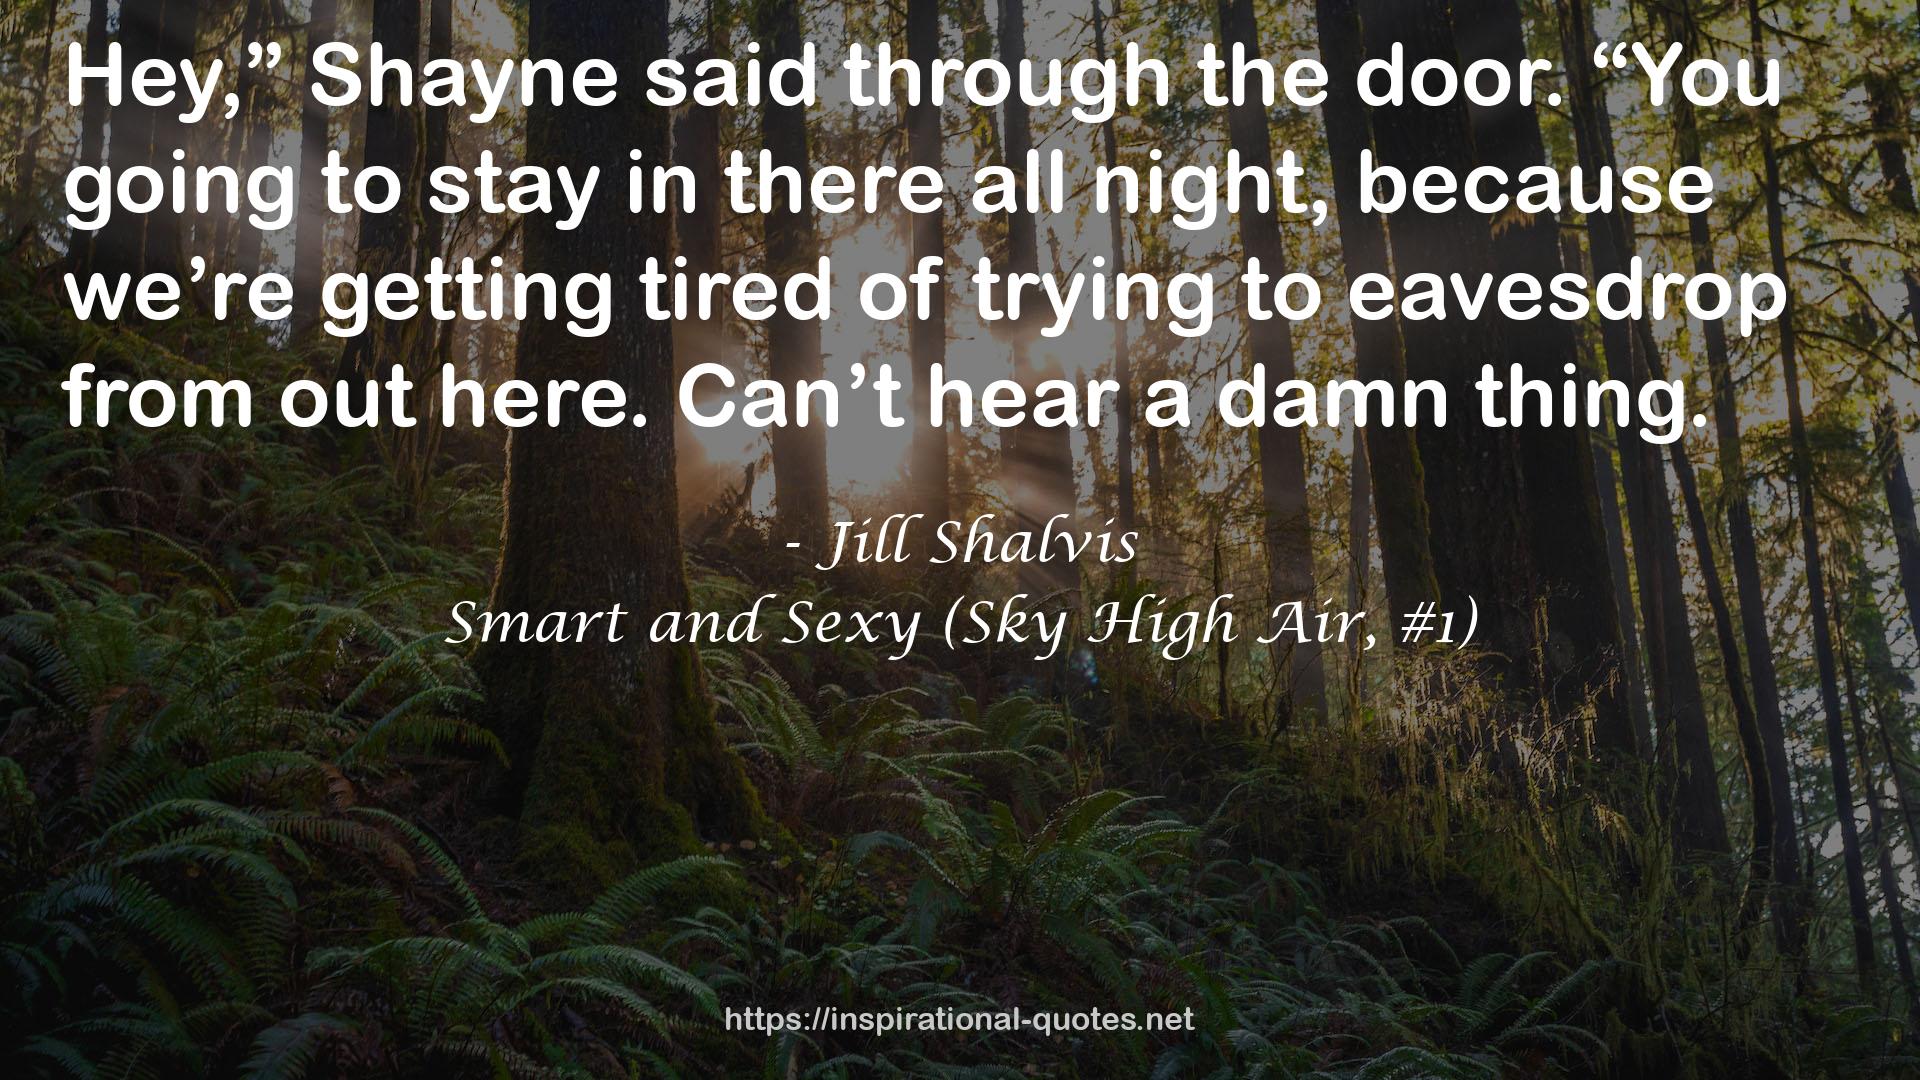 Smart and Sexy (Sky High Air, #1) QUOTES